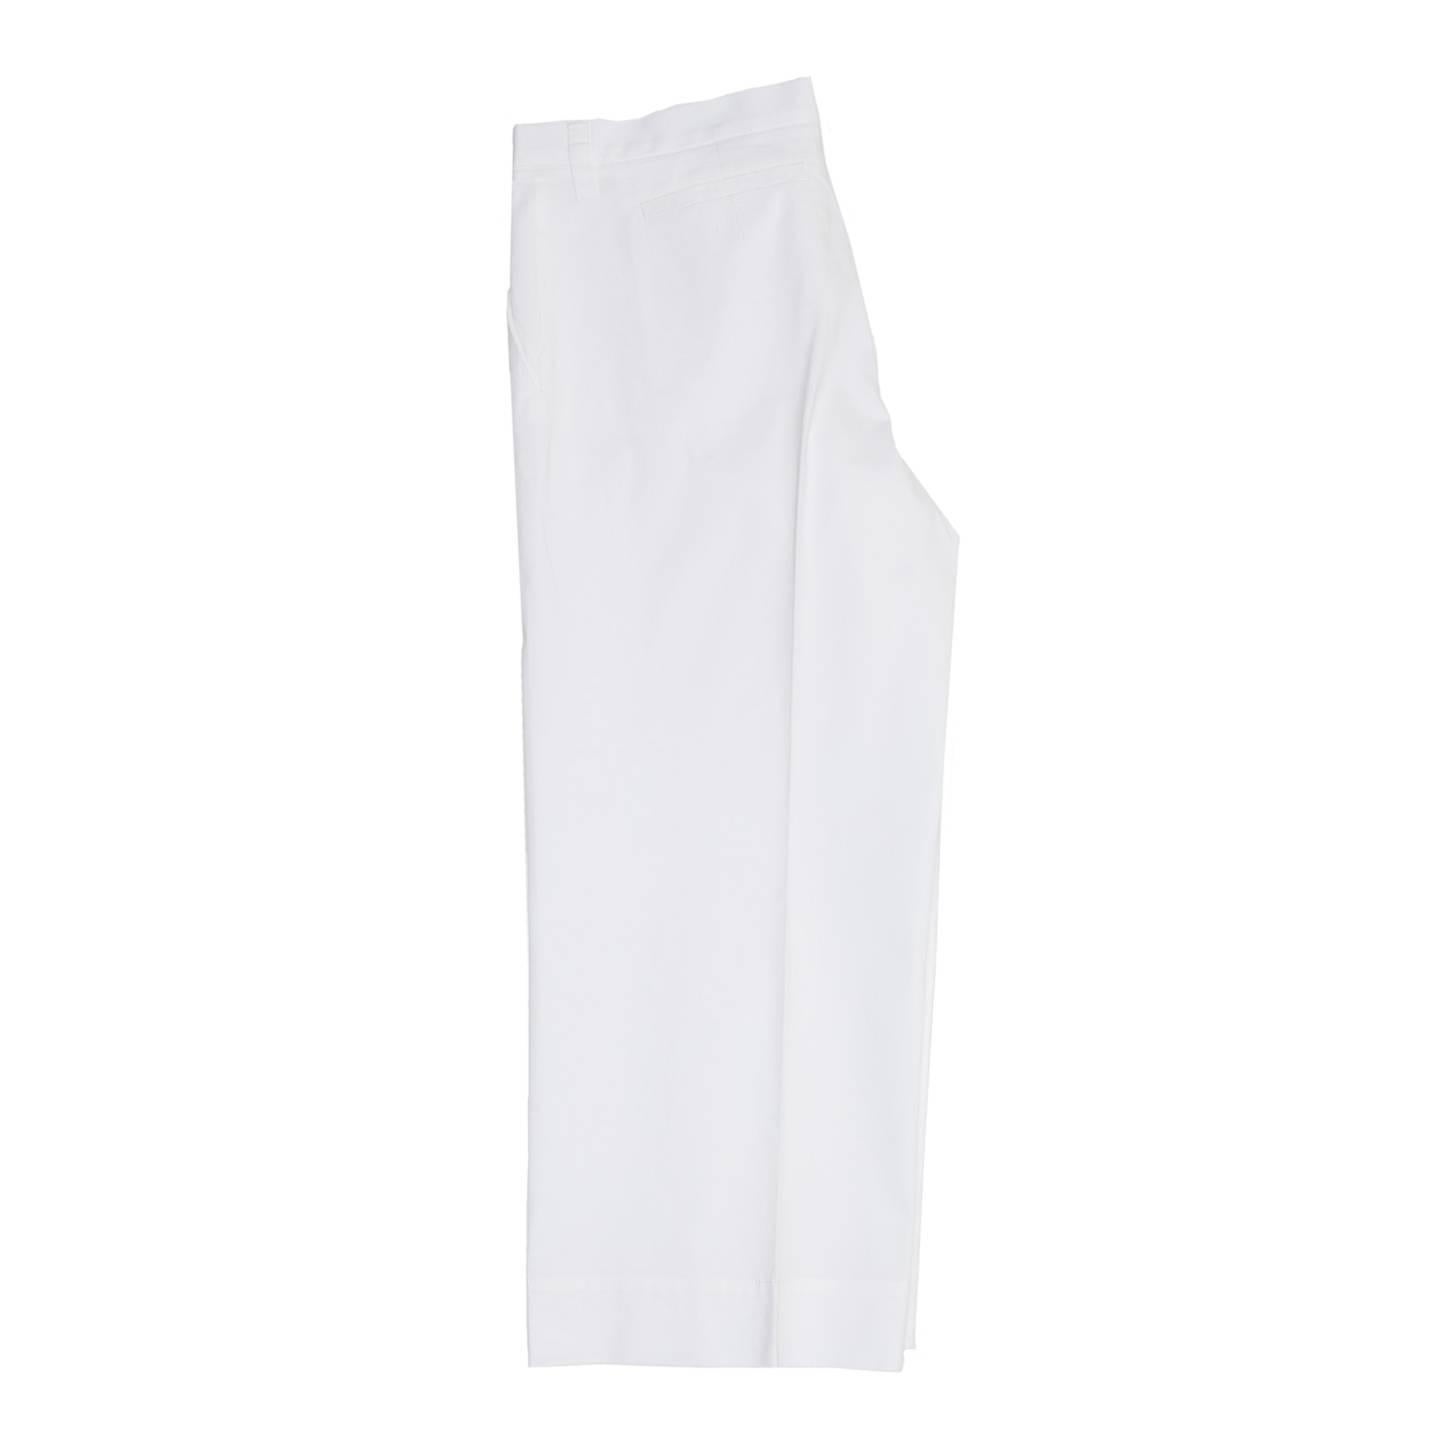 Jil Sander White Cotton Cropped Pants In Excellent Condition For Sale In Brooklyn, NY